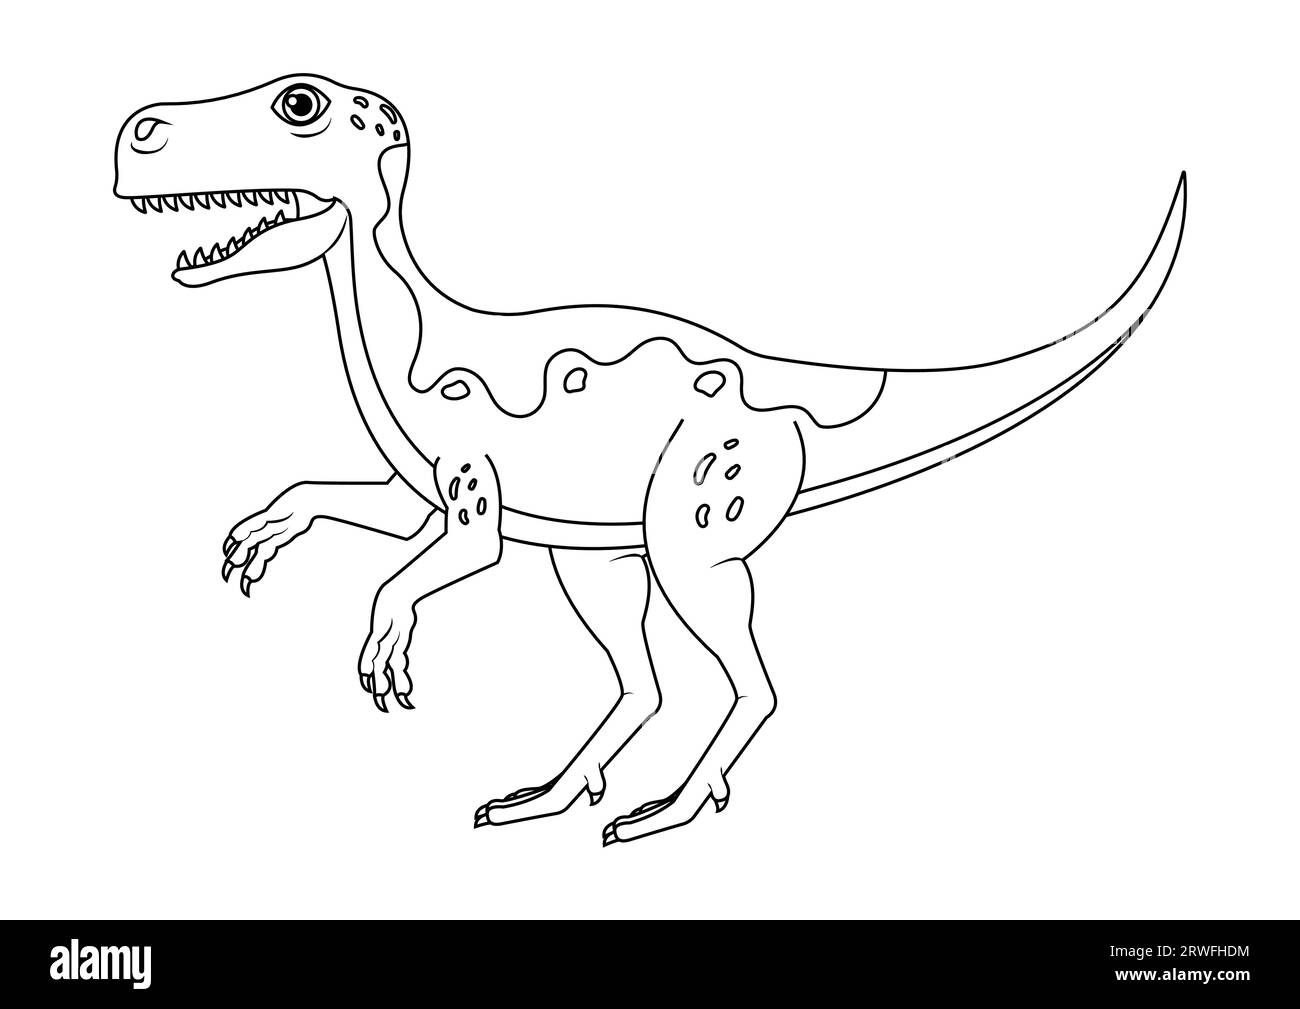 Black and White Raptor Dinosaur Cartoon Character Vector. Coloring Page of a Raptor Dinosaur Stock Vector